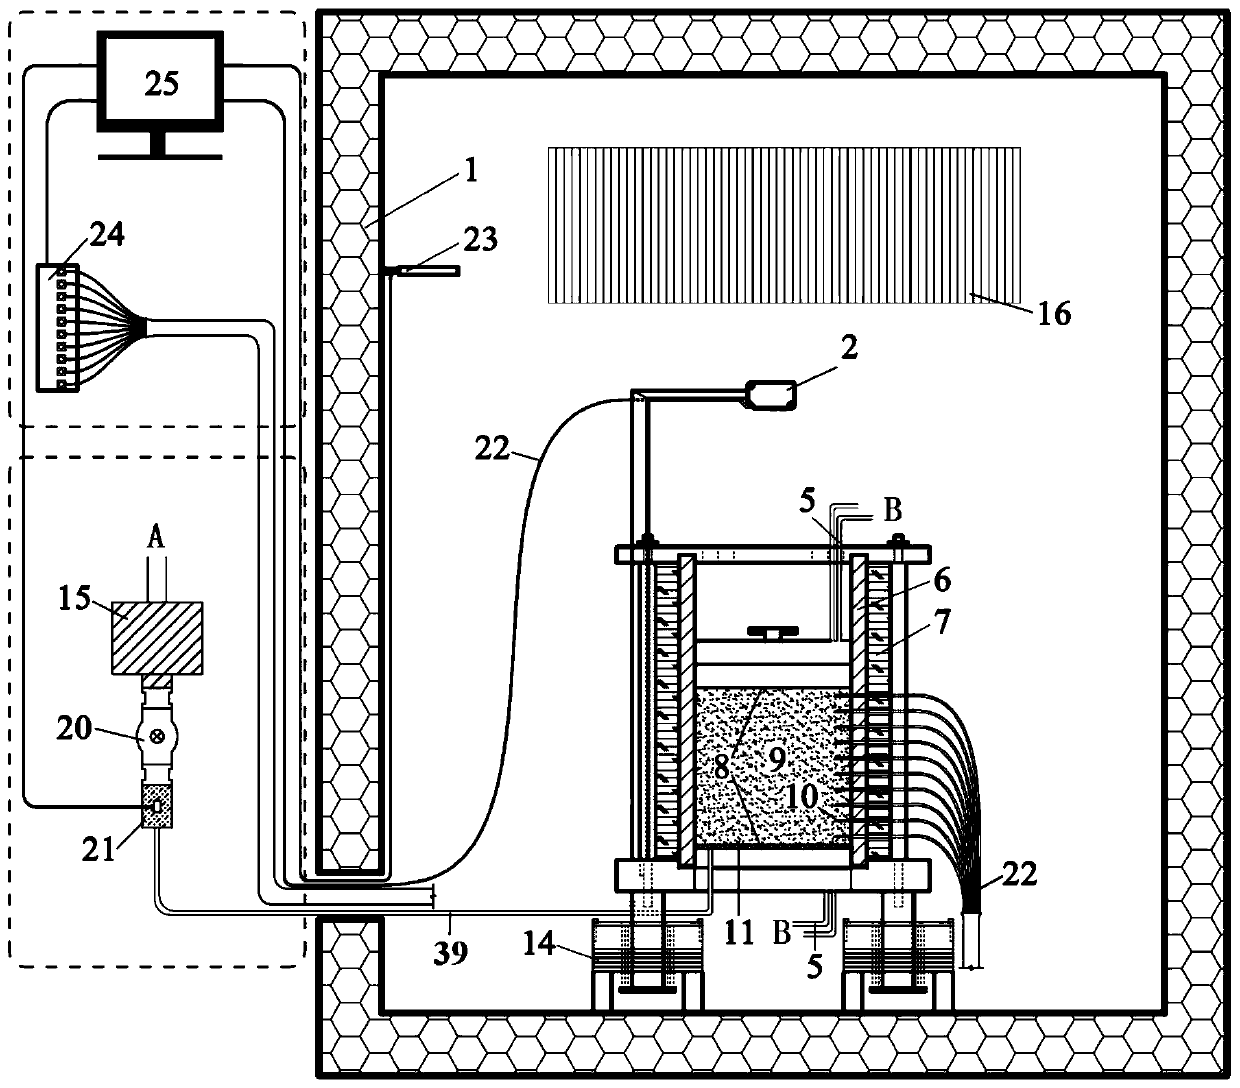 Automatic monitoring system for high-precision soil frost heaving process